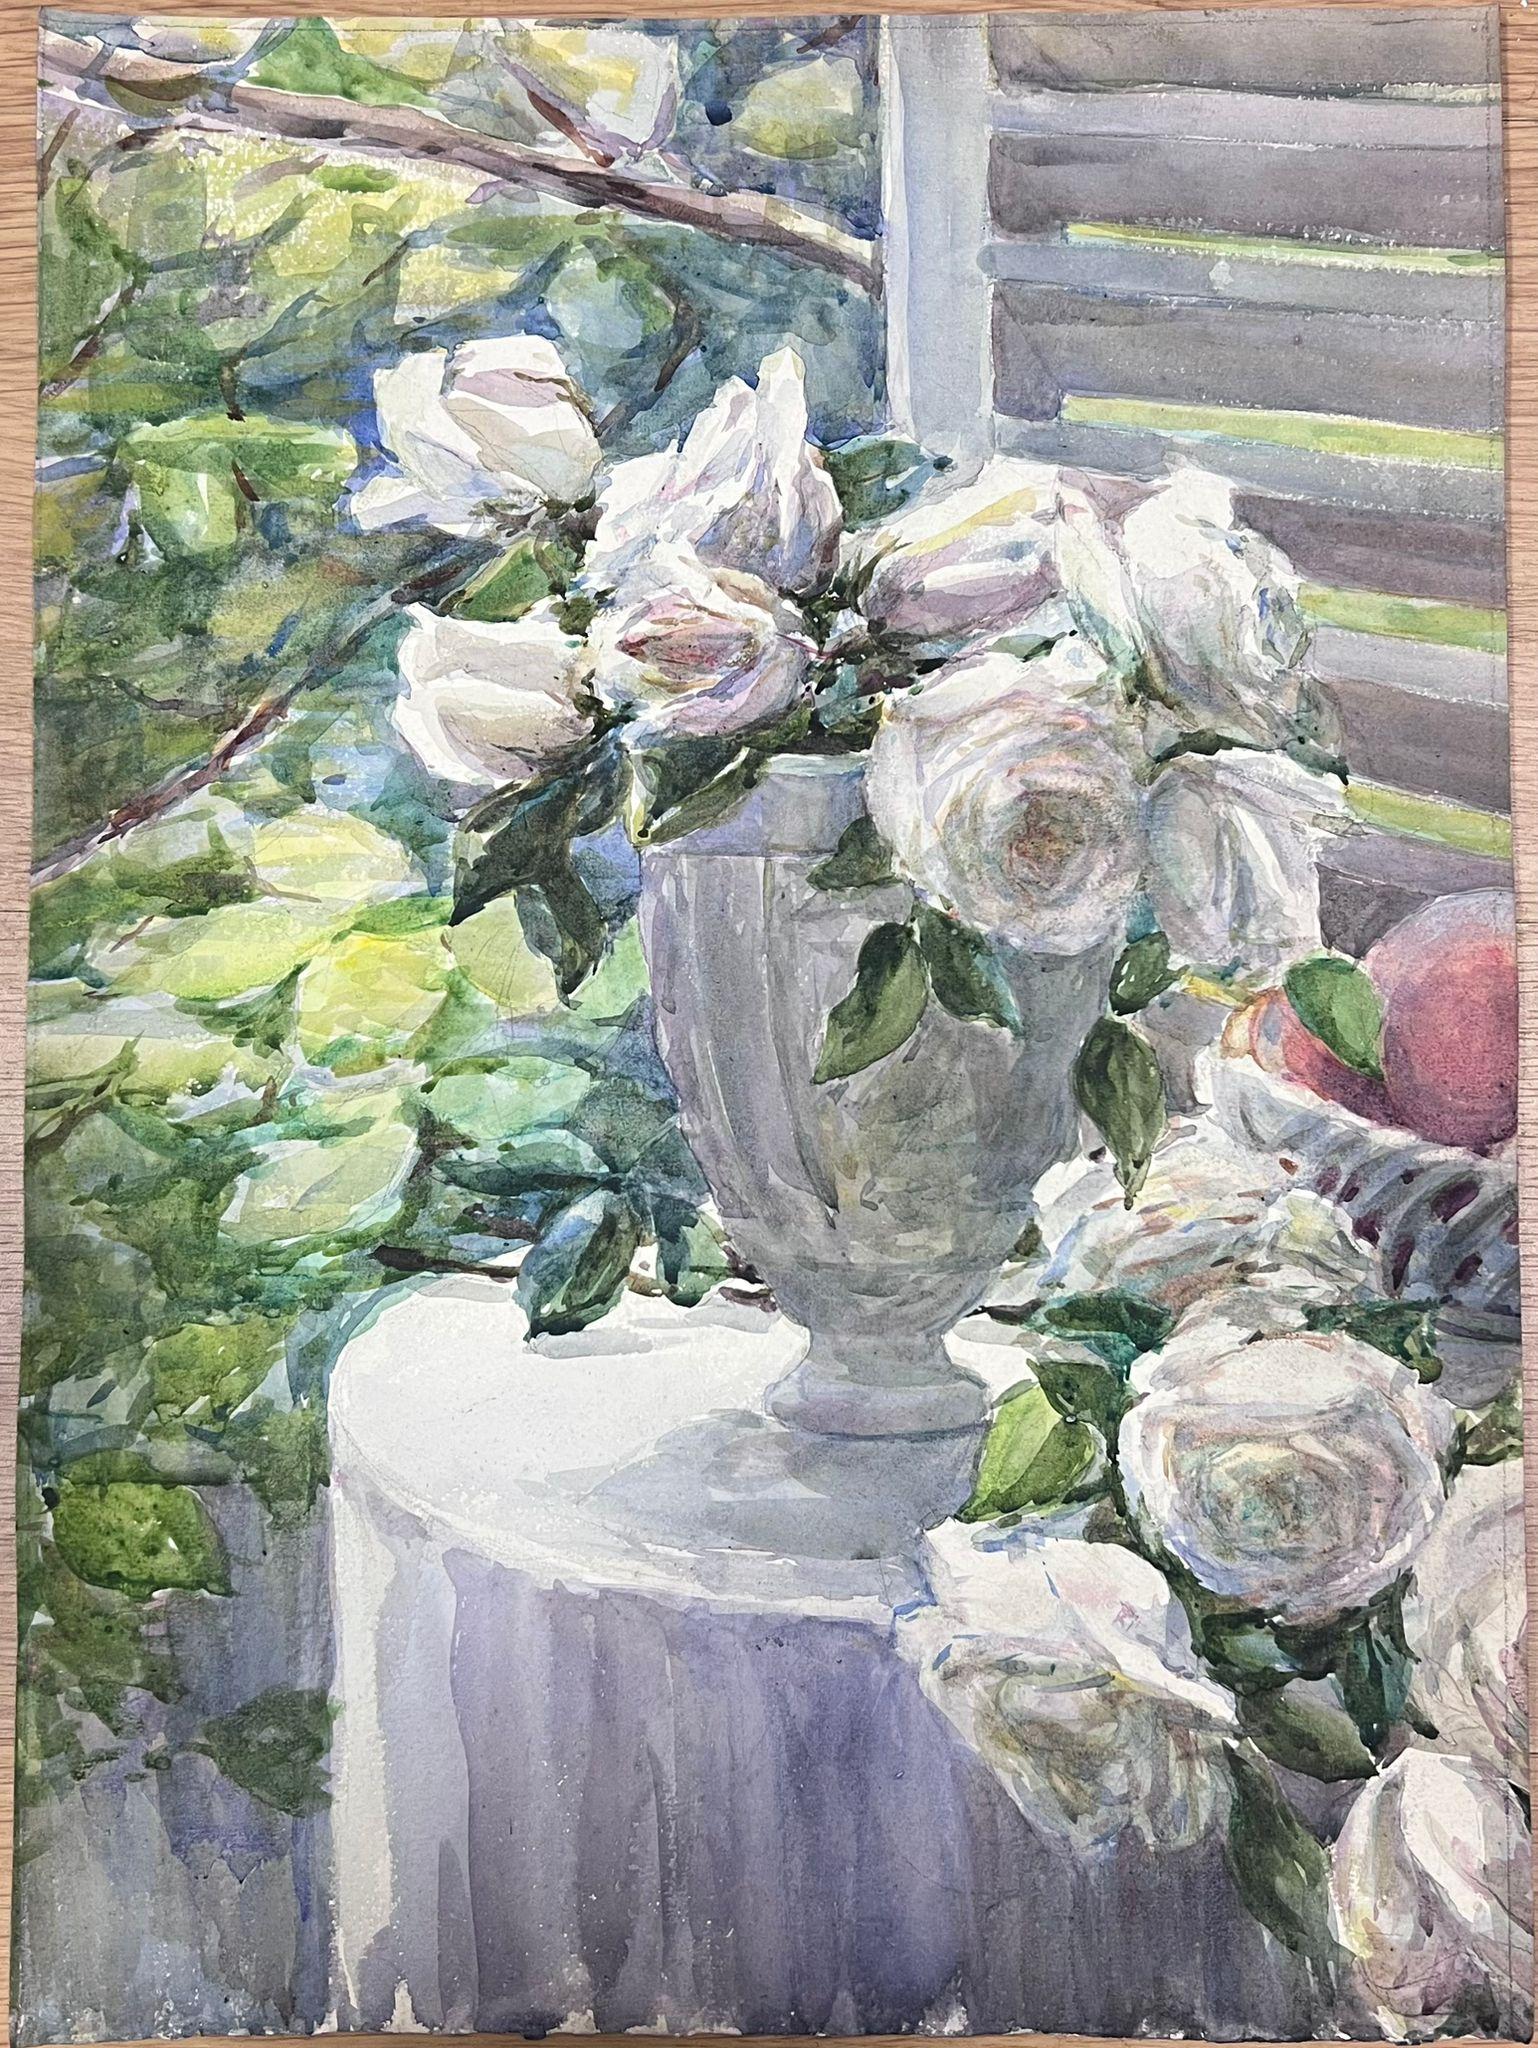 Garden Roses
signed by Louise Alix (French, 1888-1980) *see notes below
provenance stamp to the back 
watercolour painting on artist paper, unframed
measures: 18.5 high by 14.5 inches wide
condition: overall very good and sound, a few scuffs and